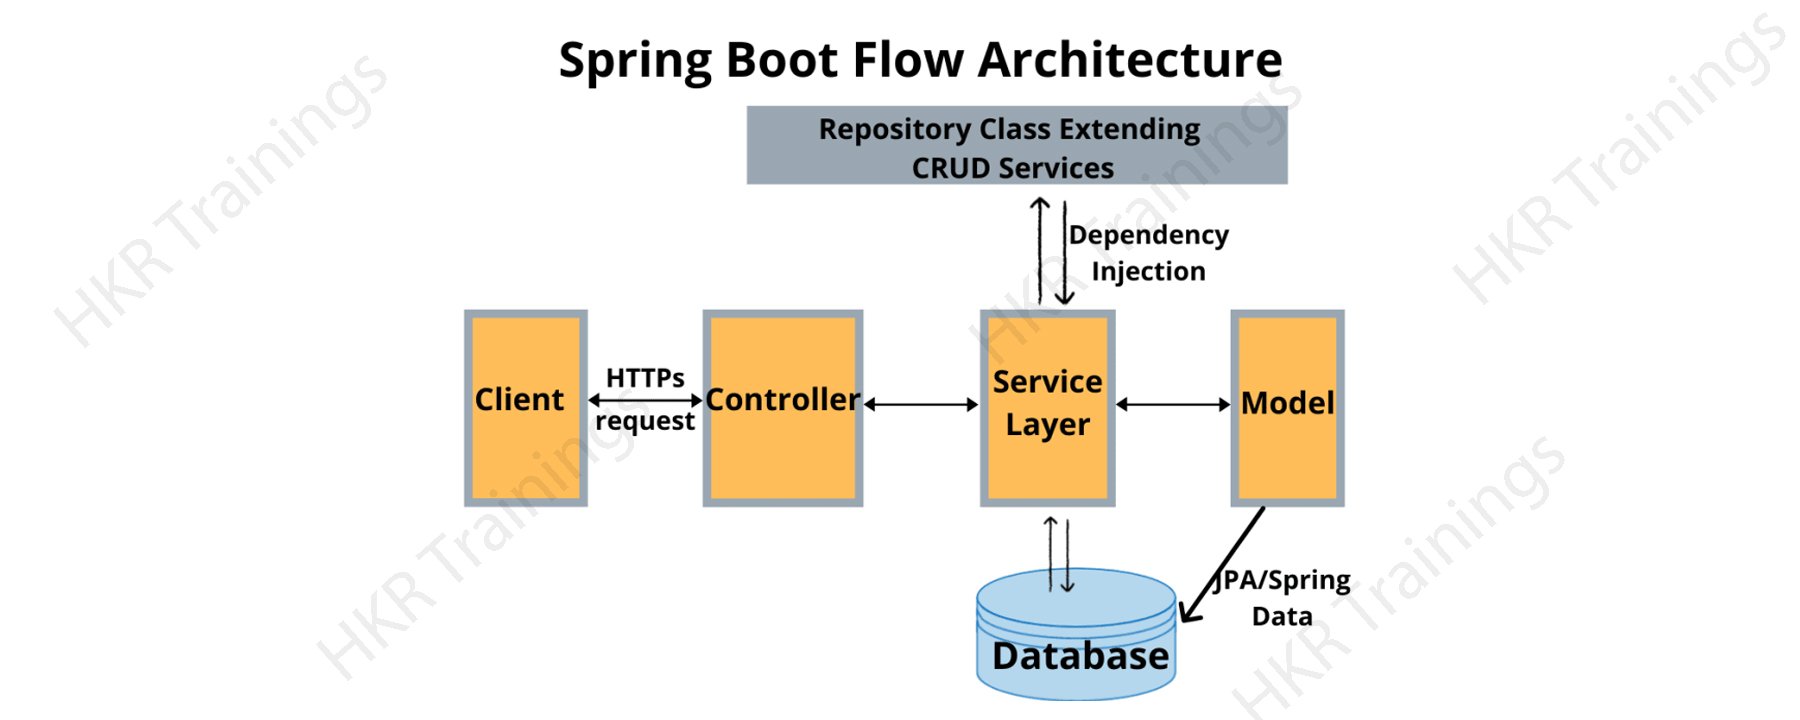 Spring Boot flow architecture